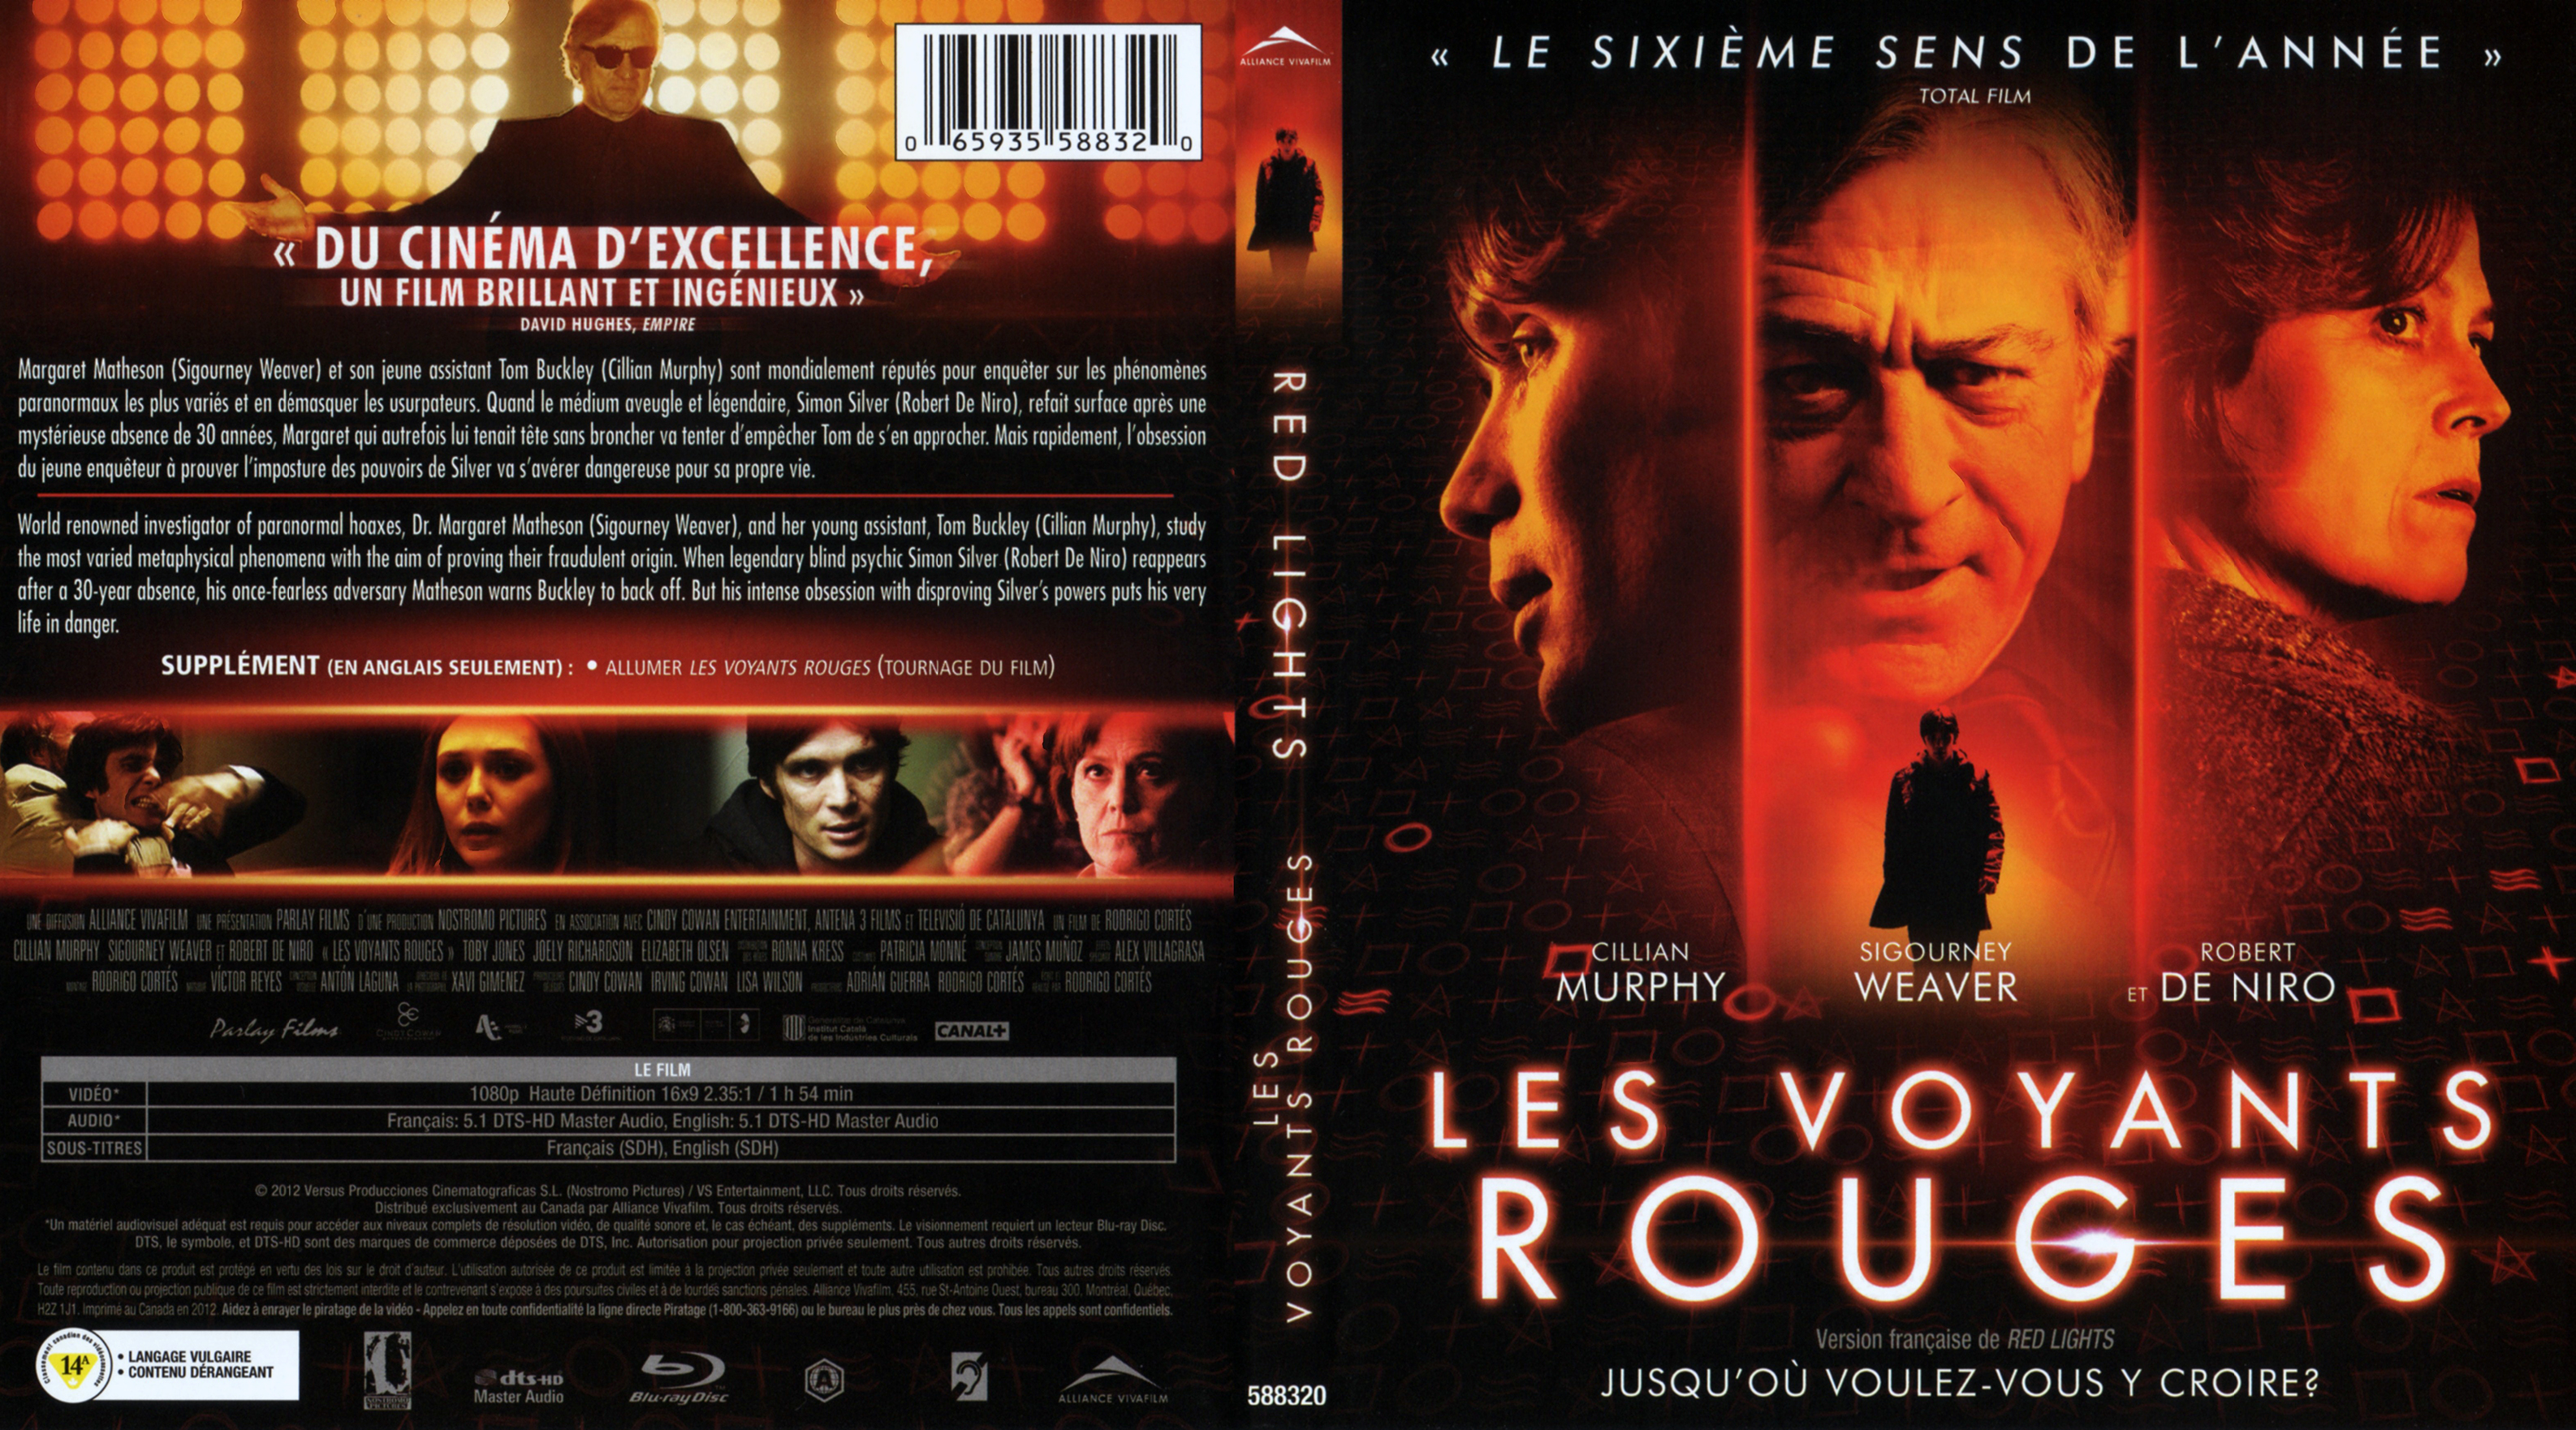 Jaquette DVD Les voyants rouge - Red lights (Canadienne) (BLU-RAY)